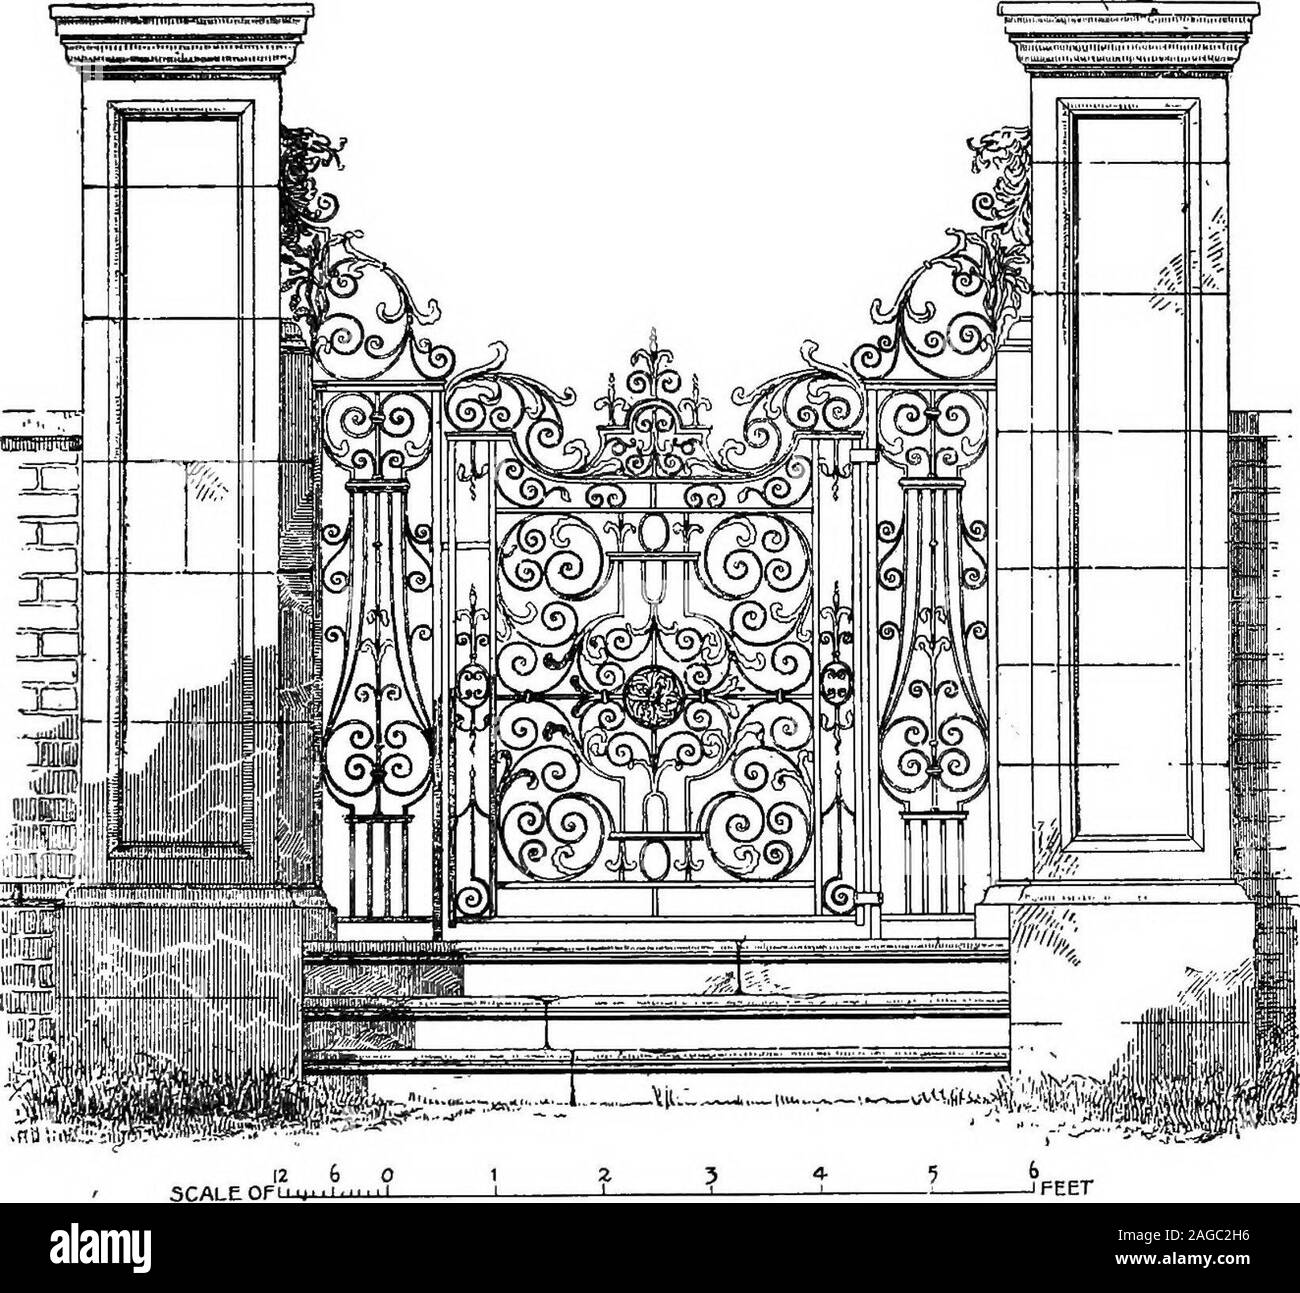 . English ironwork of the XVIIth & XVIIIth centuries; an historical & analytical account of the development of exterior smithcraft. William Edney 17 of scrolls and pTramid tops at intervals. A low but beautiful wicketin the garden (Fig. 28) is square, with a large centre rosette andscroll design repeating four times with a narrow vertical panel oiieither side and rich top ; between fixed pilasters with lyre filling?. ALFRED H. HIND, del.FIG. 28.. GARDEN GATES AT SCRAPTOFT HALL, NEAR LEICESTER, BY EDNEY. and buttress scrolls of laurel sprays and eagle-headed acanthus overthem abutting on stone Stock Photo